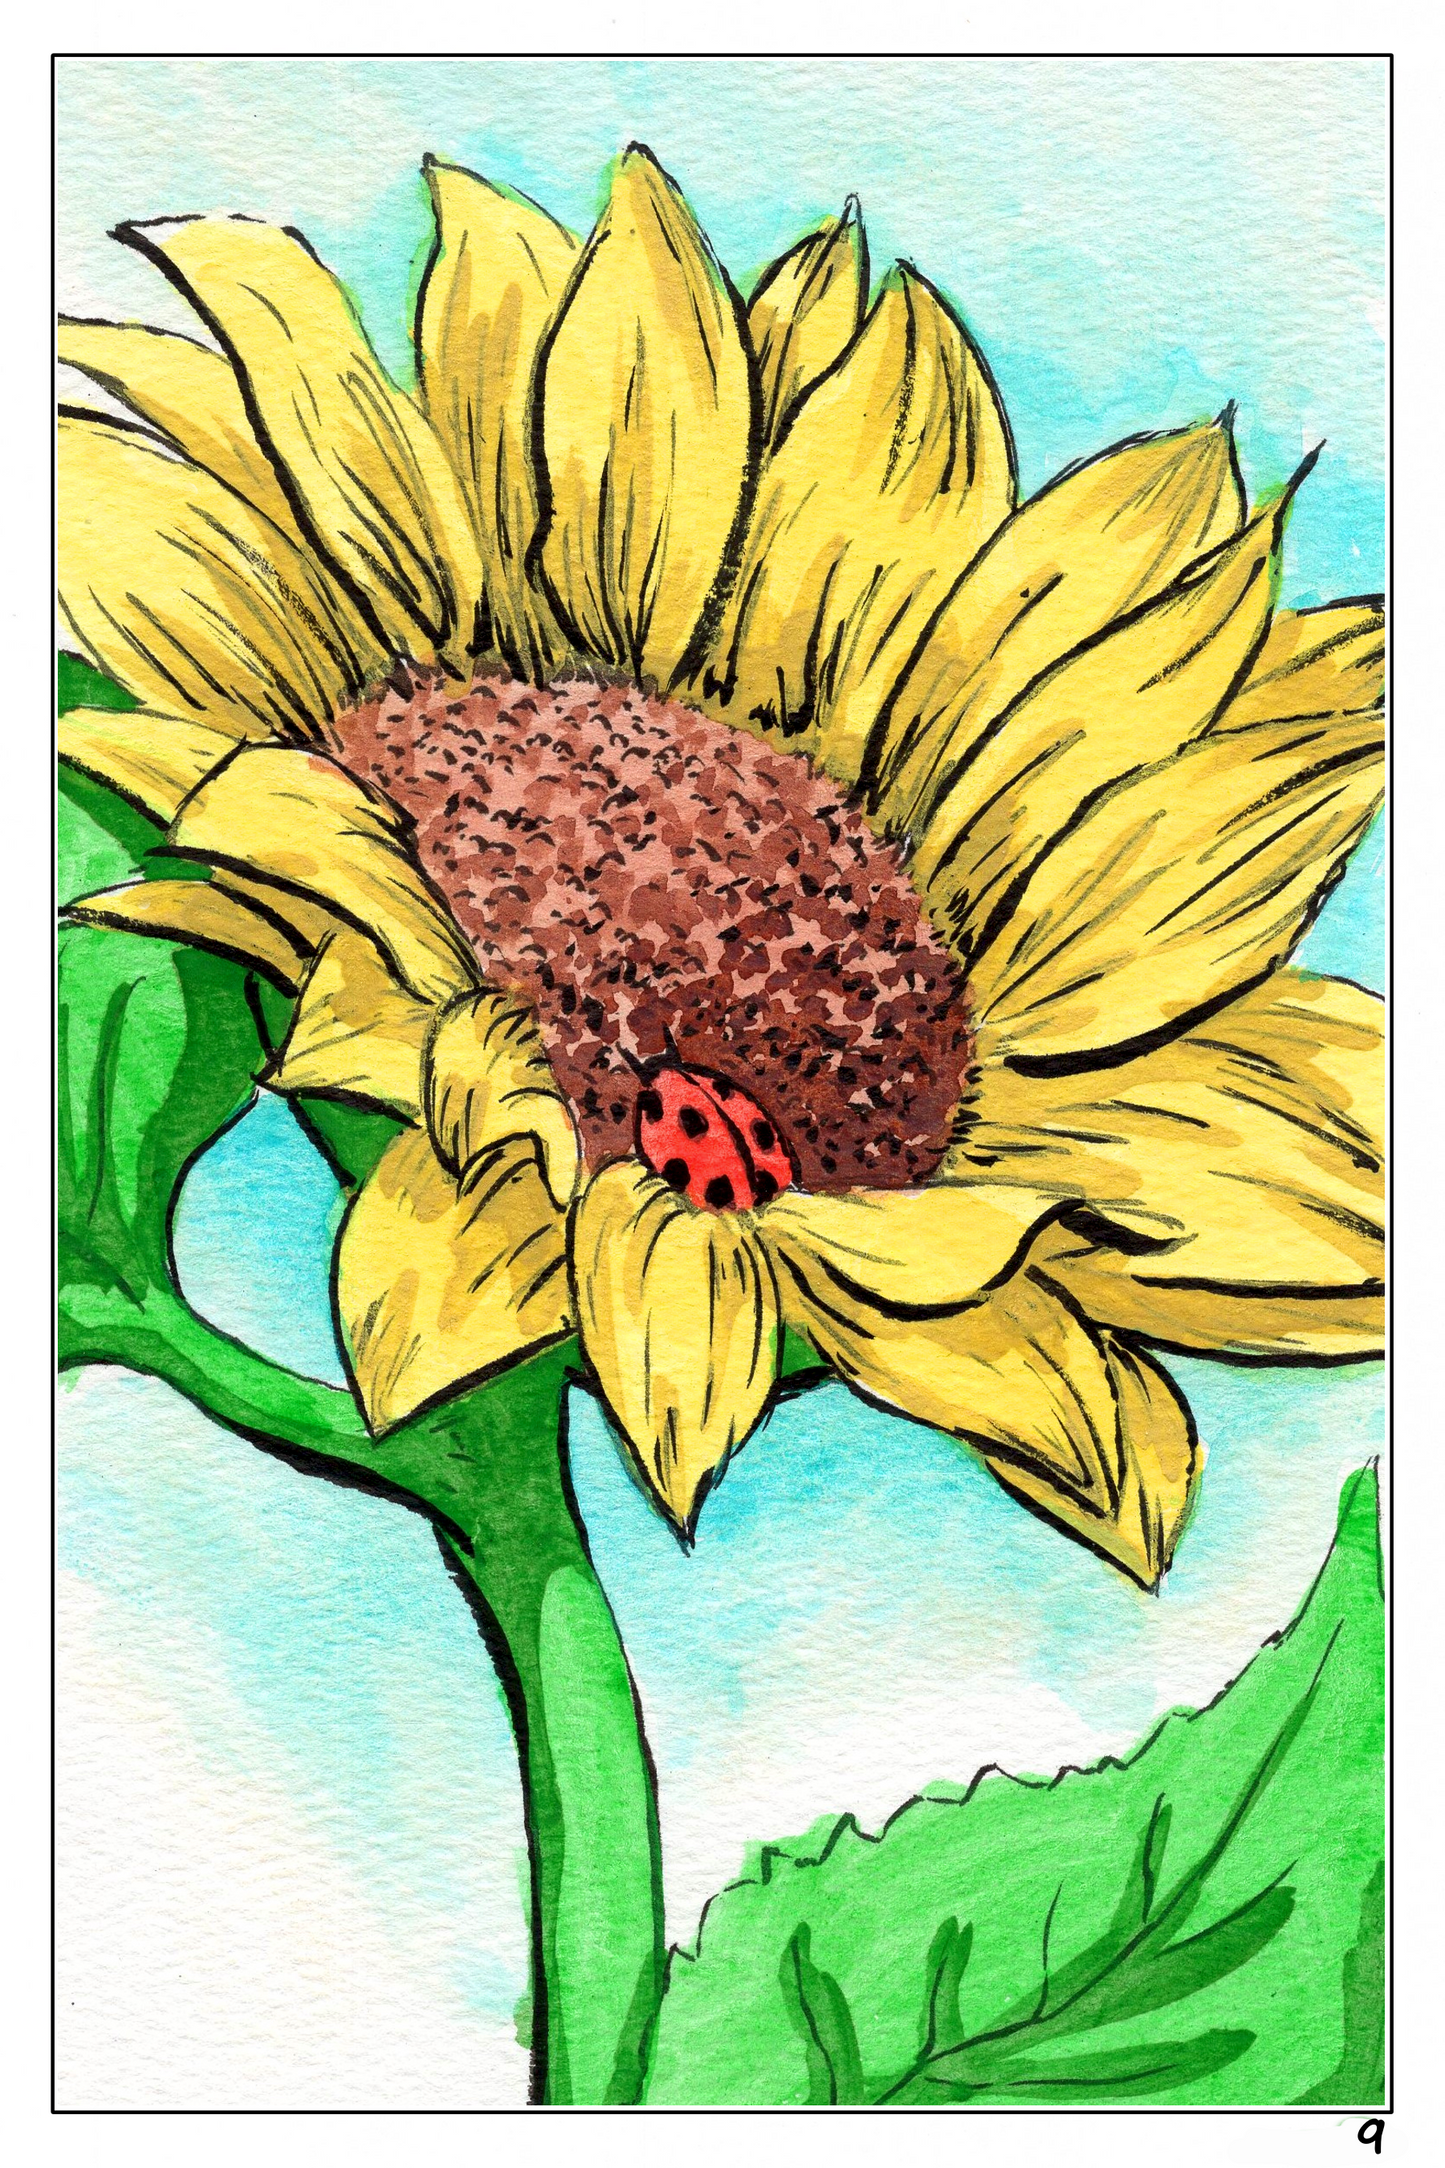 Coloring Card Adult Coloring Book Sunflowers, DIY, Watercolor Paper,  Colored Pencil, Watercolor, Marker & Pen Illustrated Stationery 